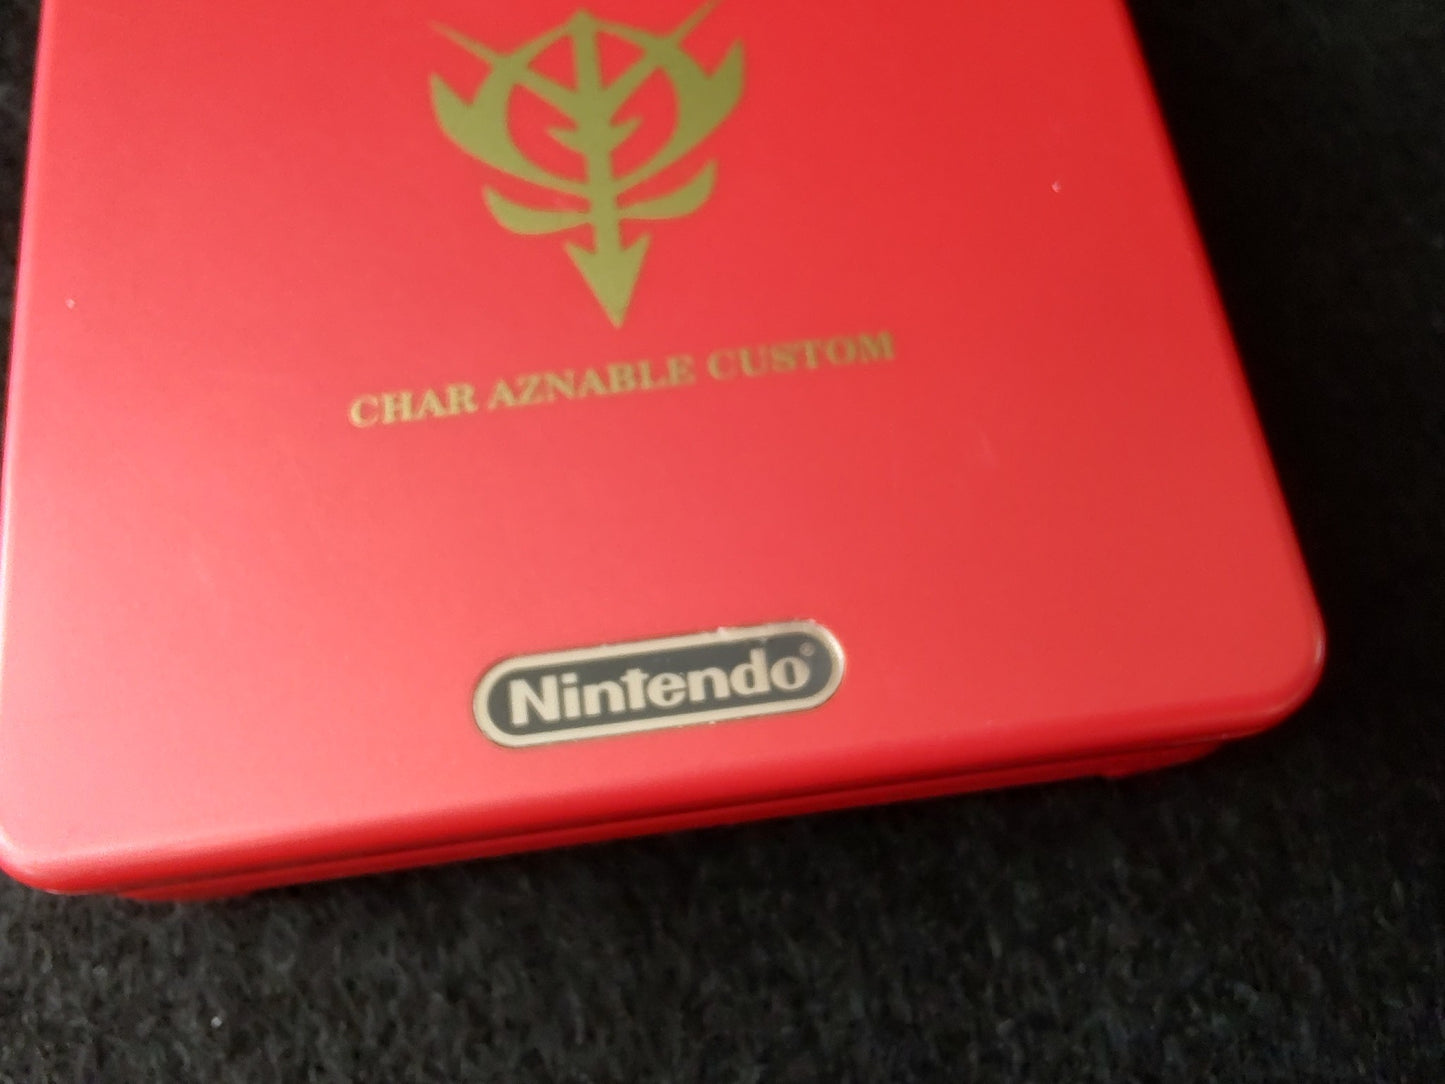 GUNDAM Exclusive use of Char LIMITED EDITION GAMEBOY ADVANCE SP CONSOLE -f0520-